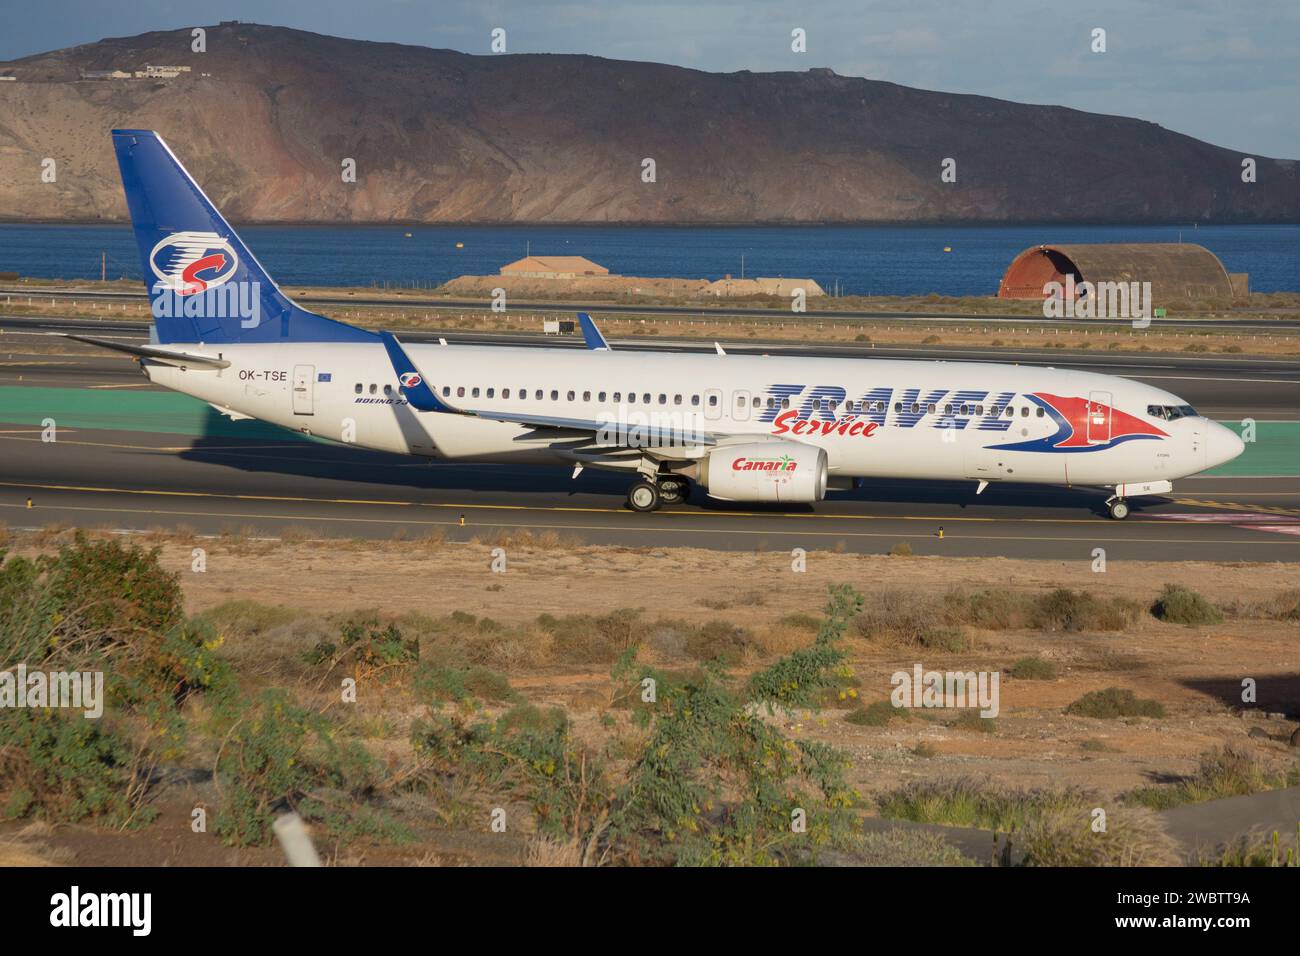 Travel Service Airlines Boeing 737 airliner Stock Photo